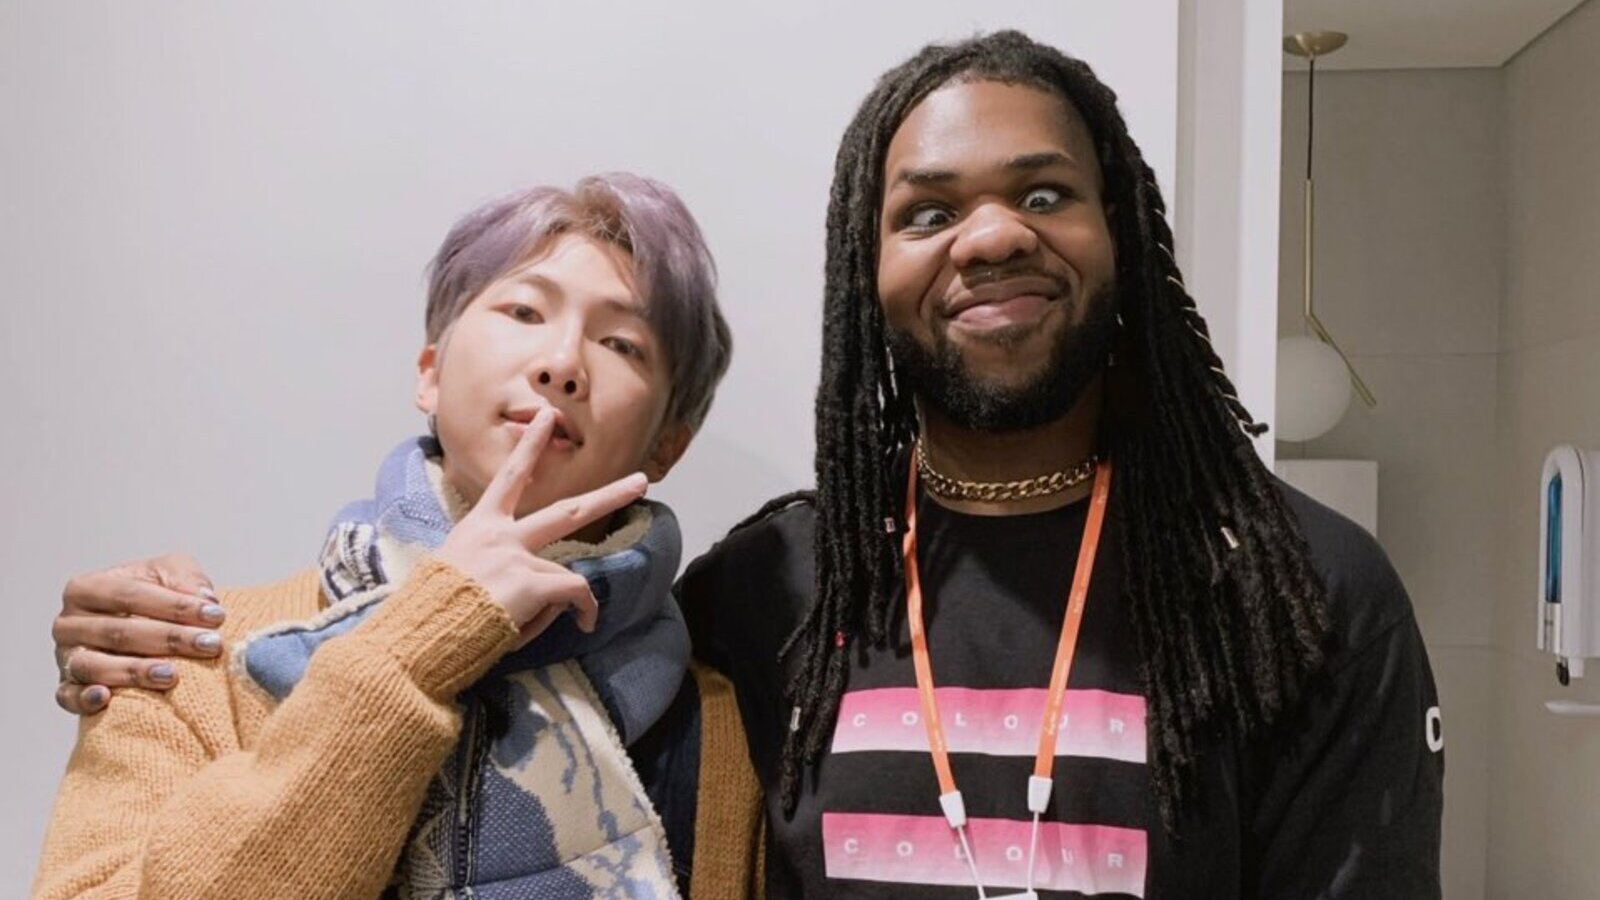 RM and MNEK meeting